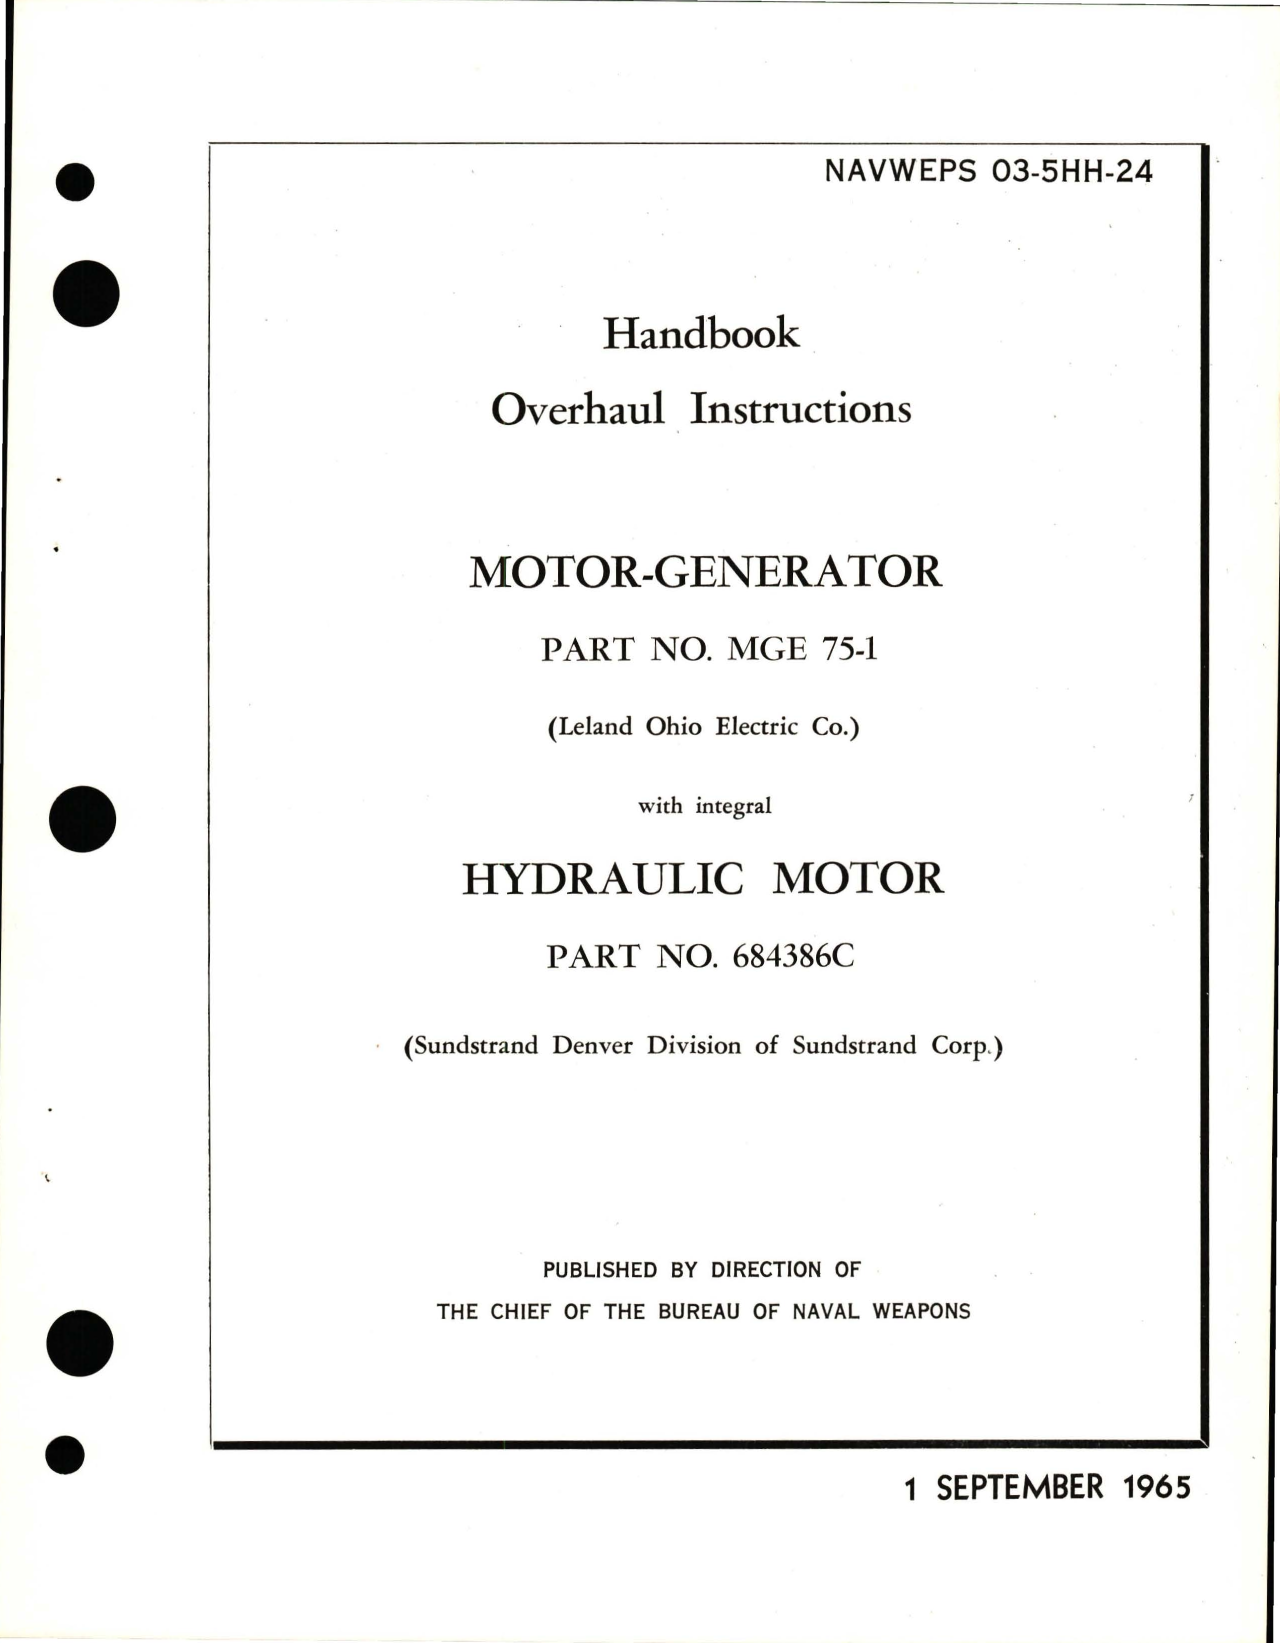 Sample page 1 from AirCorps Library document: Overhaul Instructions for Motor-Generator - Part MGE 75-1 and Hydraulic Motor - Part 684386C